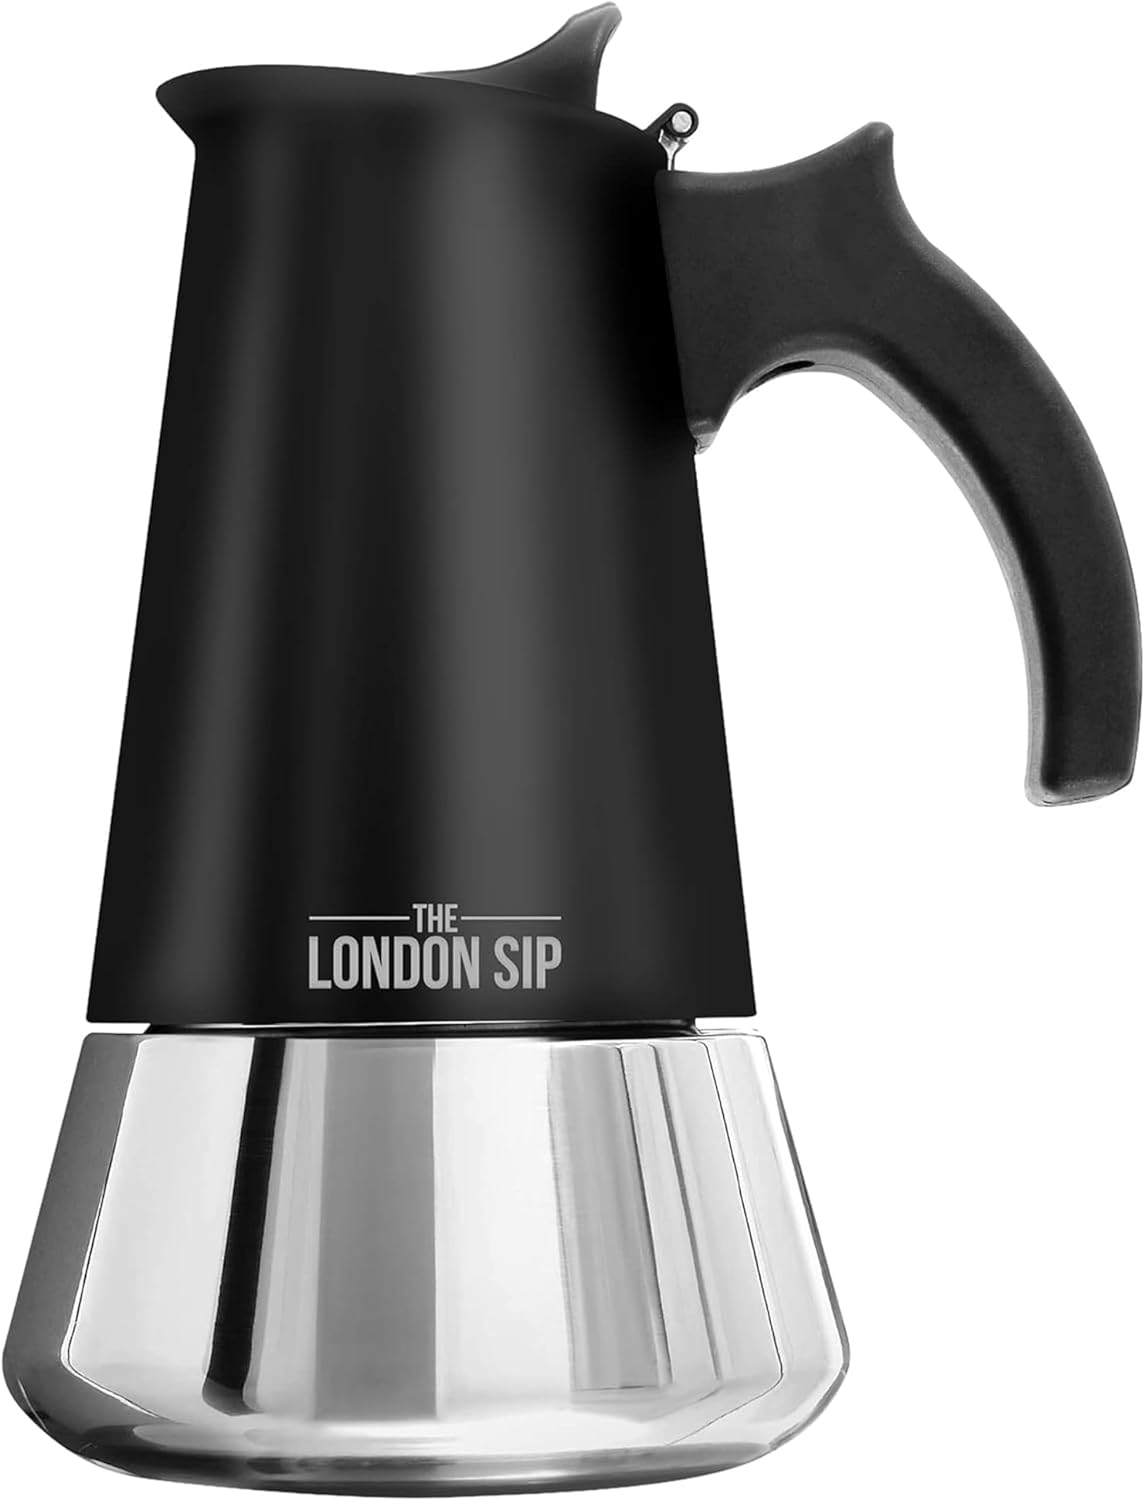 The London Sip Espresso Maker Suitable for Induction Cookers, Mocha Pot Made of Stainless Steel, Espresso Jug 10 Cups (500 ml), Mocha Pot Suitible for All Hob Types, Black